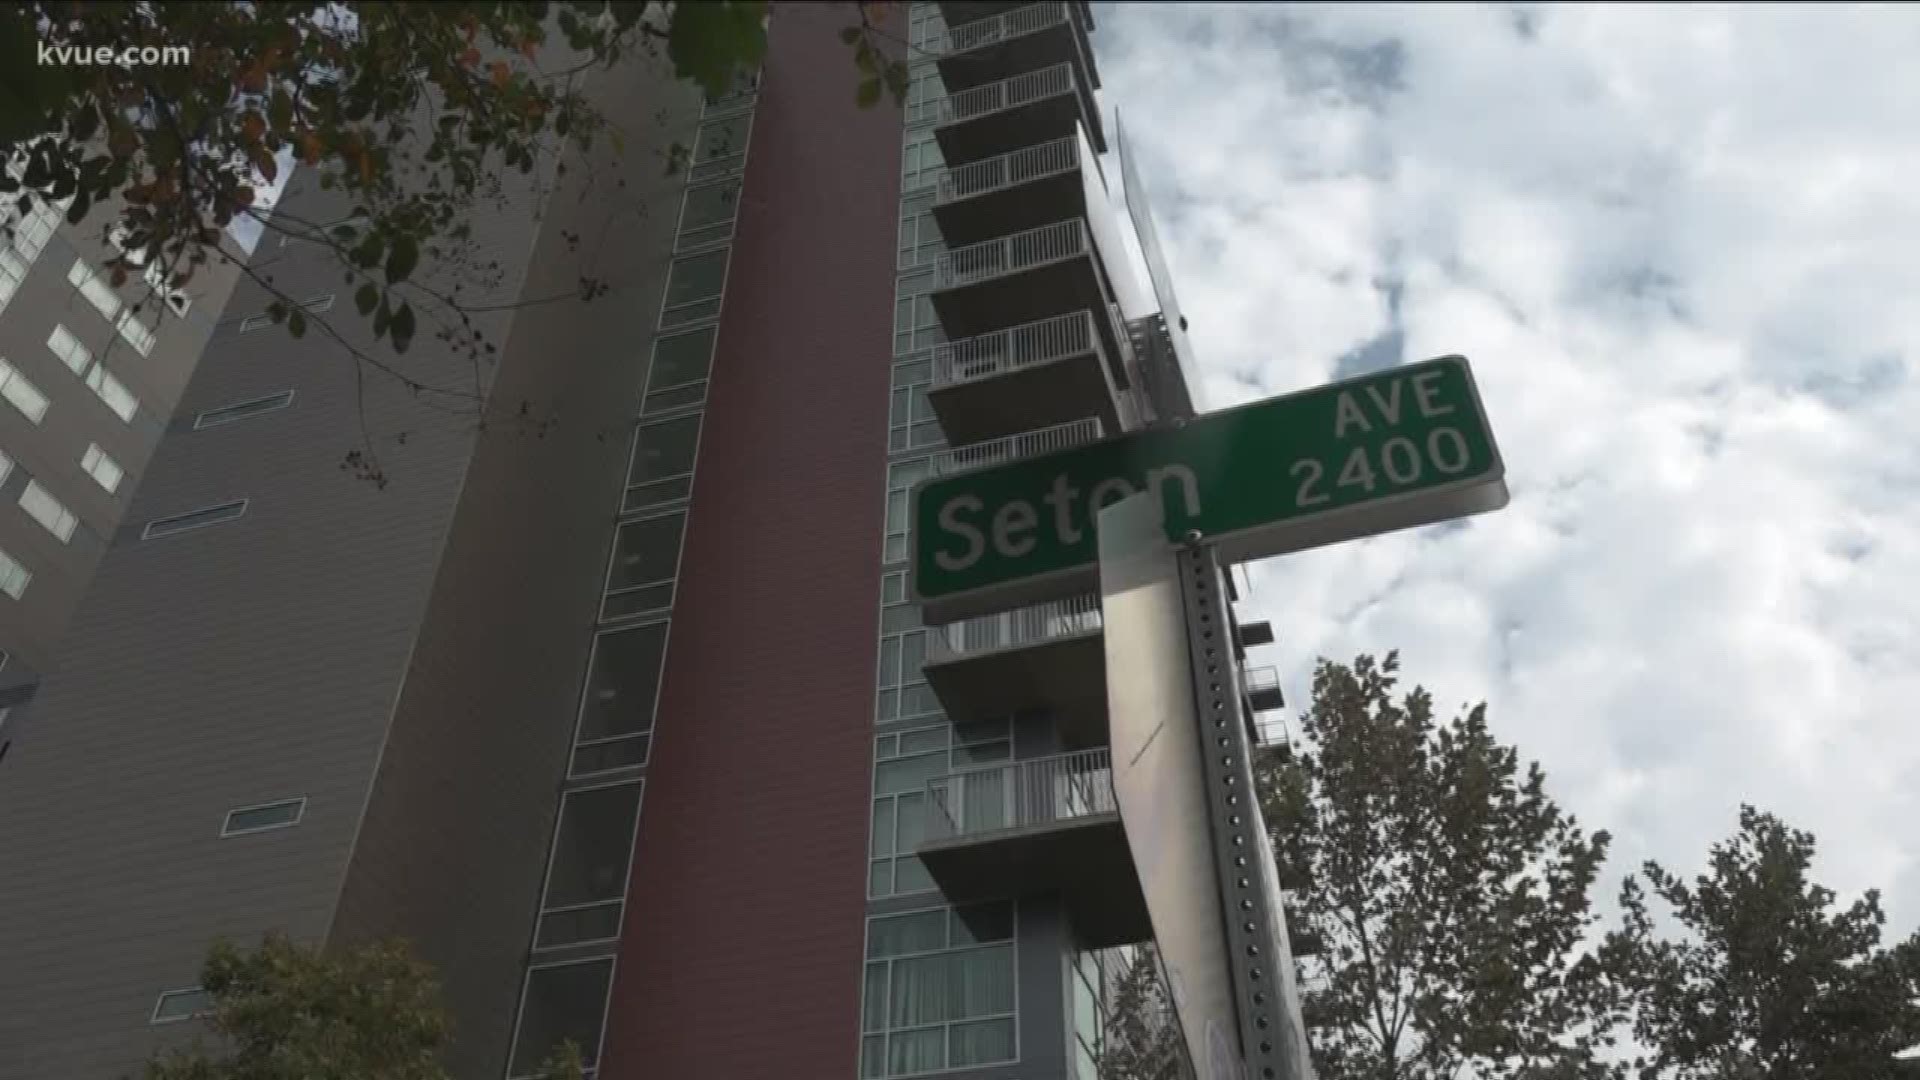 The city council approved code changes that let developers build taller apartments in the area.